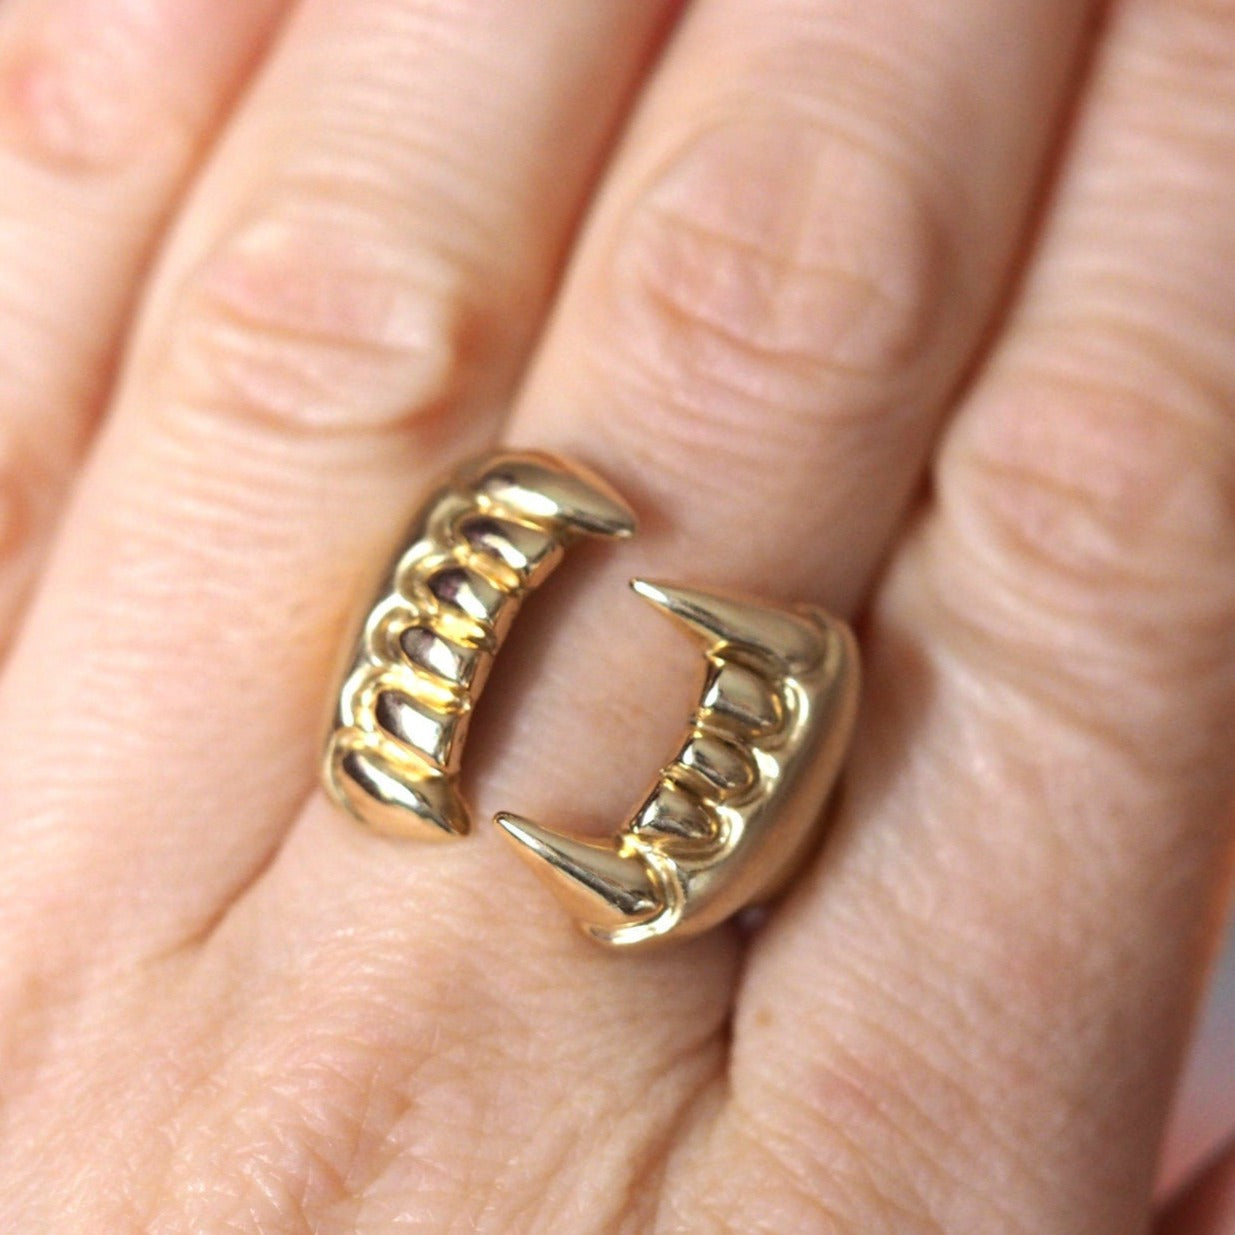 Fangs Ring - Recycled 9ct Yellow Gold